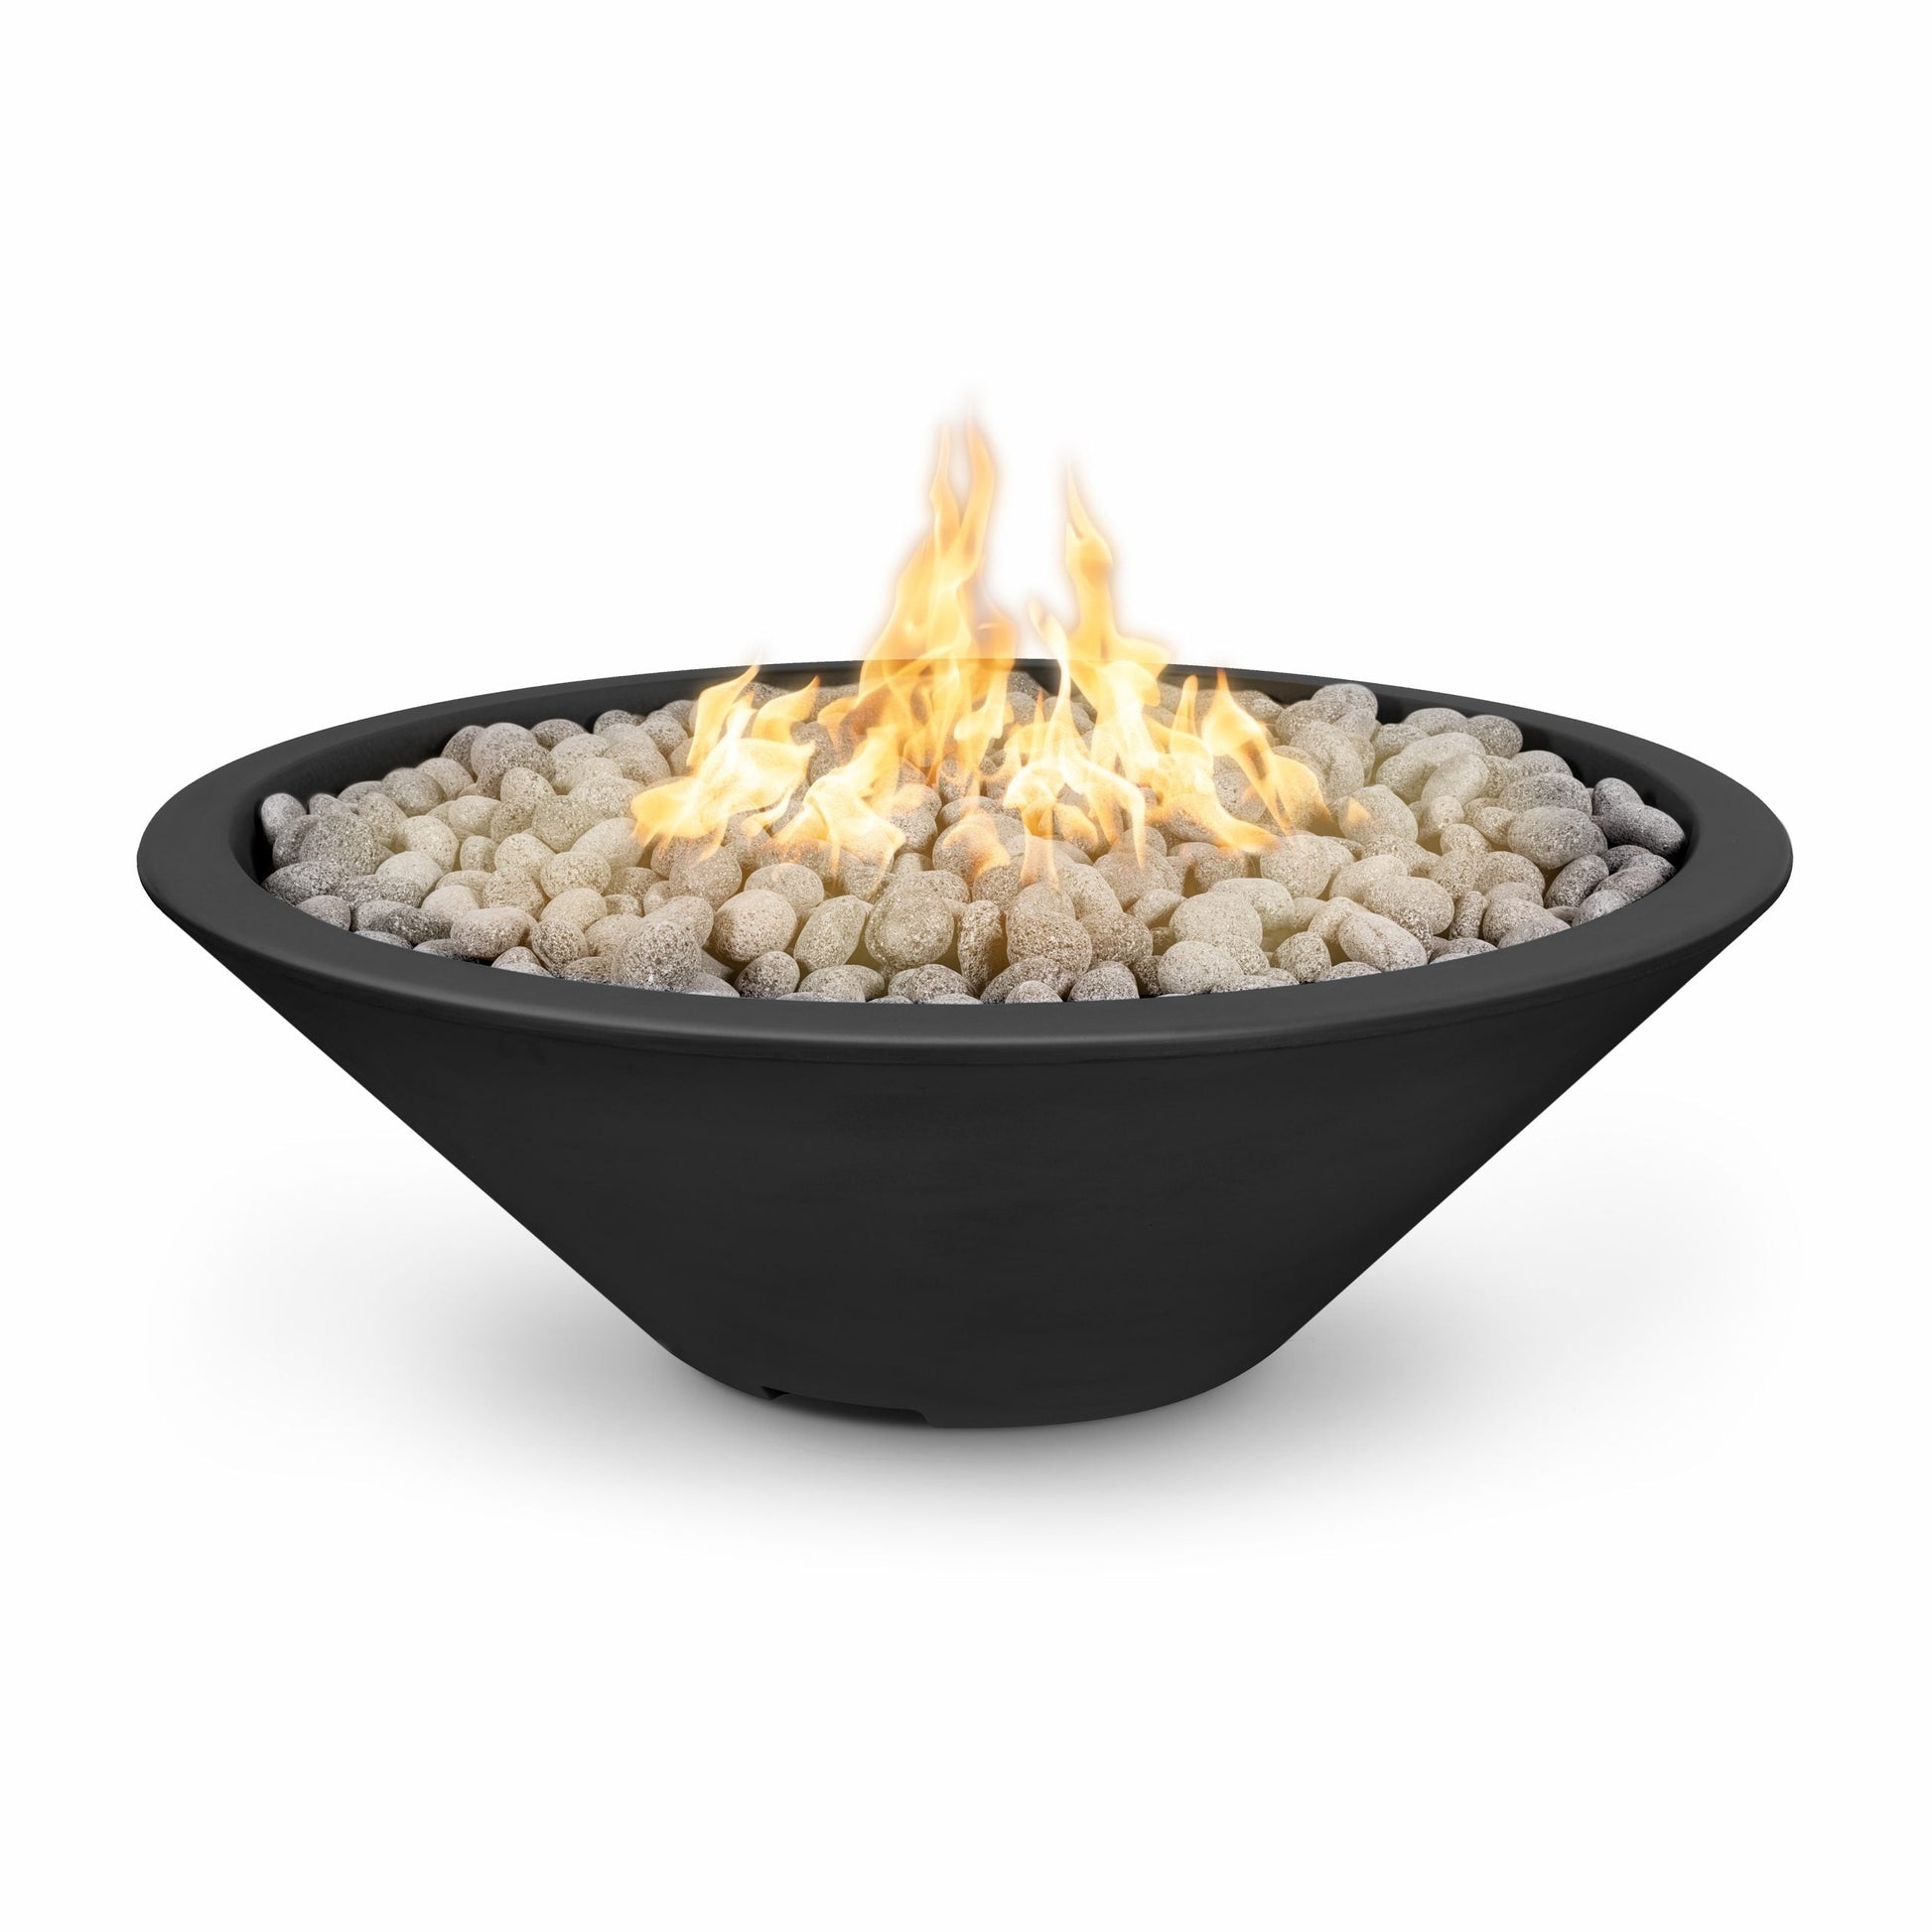 The Outdoor Plus Round Cazo 60" Gray Powder Coated Metal Liquid Propane Fire Pit with Match Lit Ignition